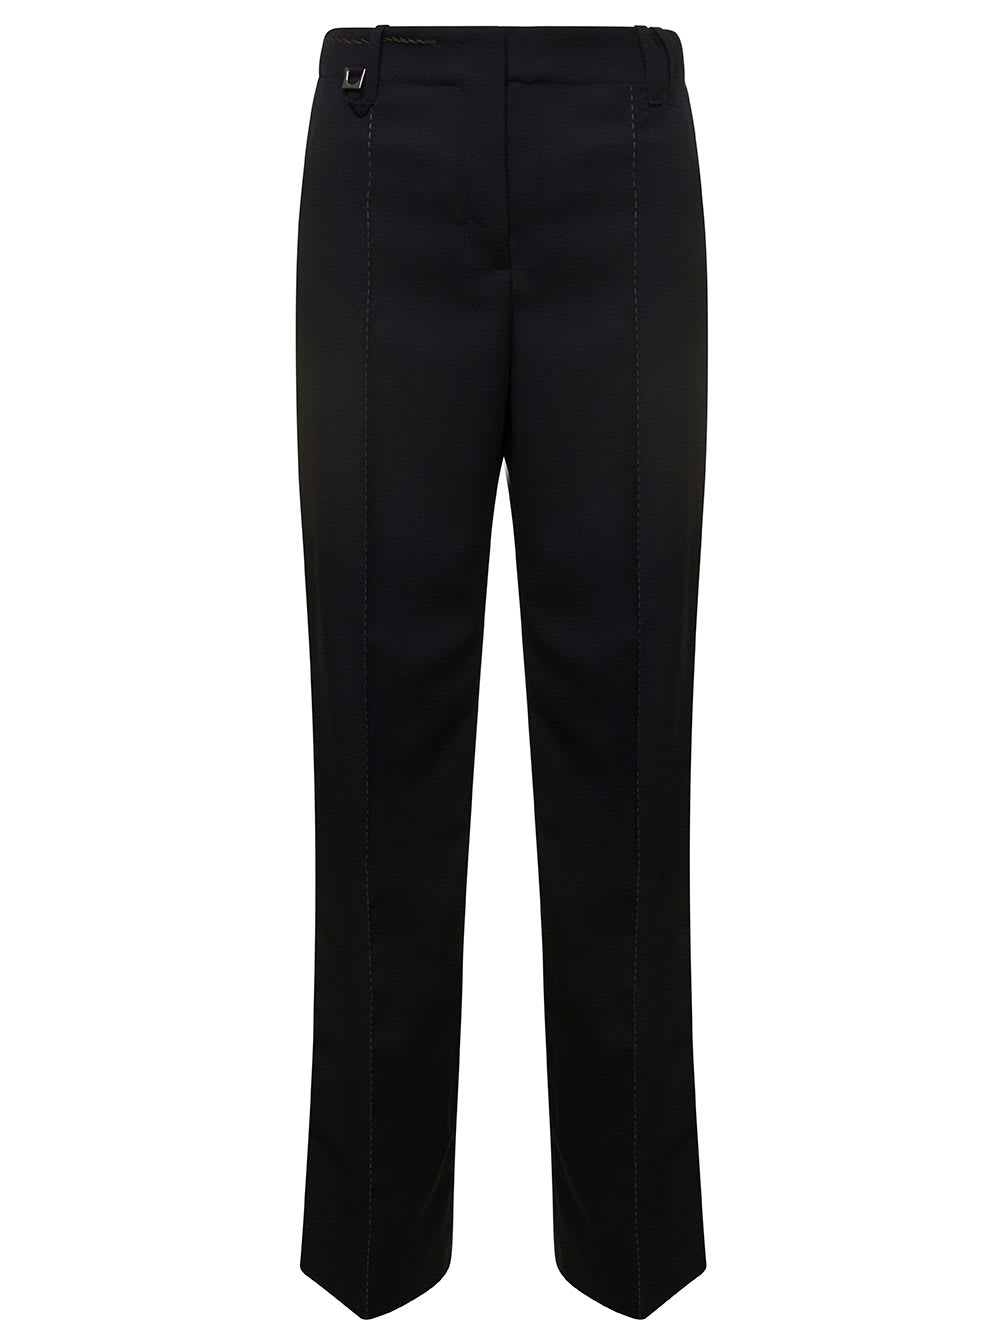 JACQUEMUS LE PANTALON CORDAO BLACK PANTS WITH PRESSED PLEATS IN WOOL WOMAN